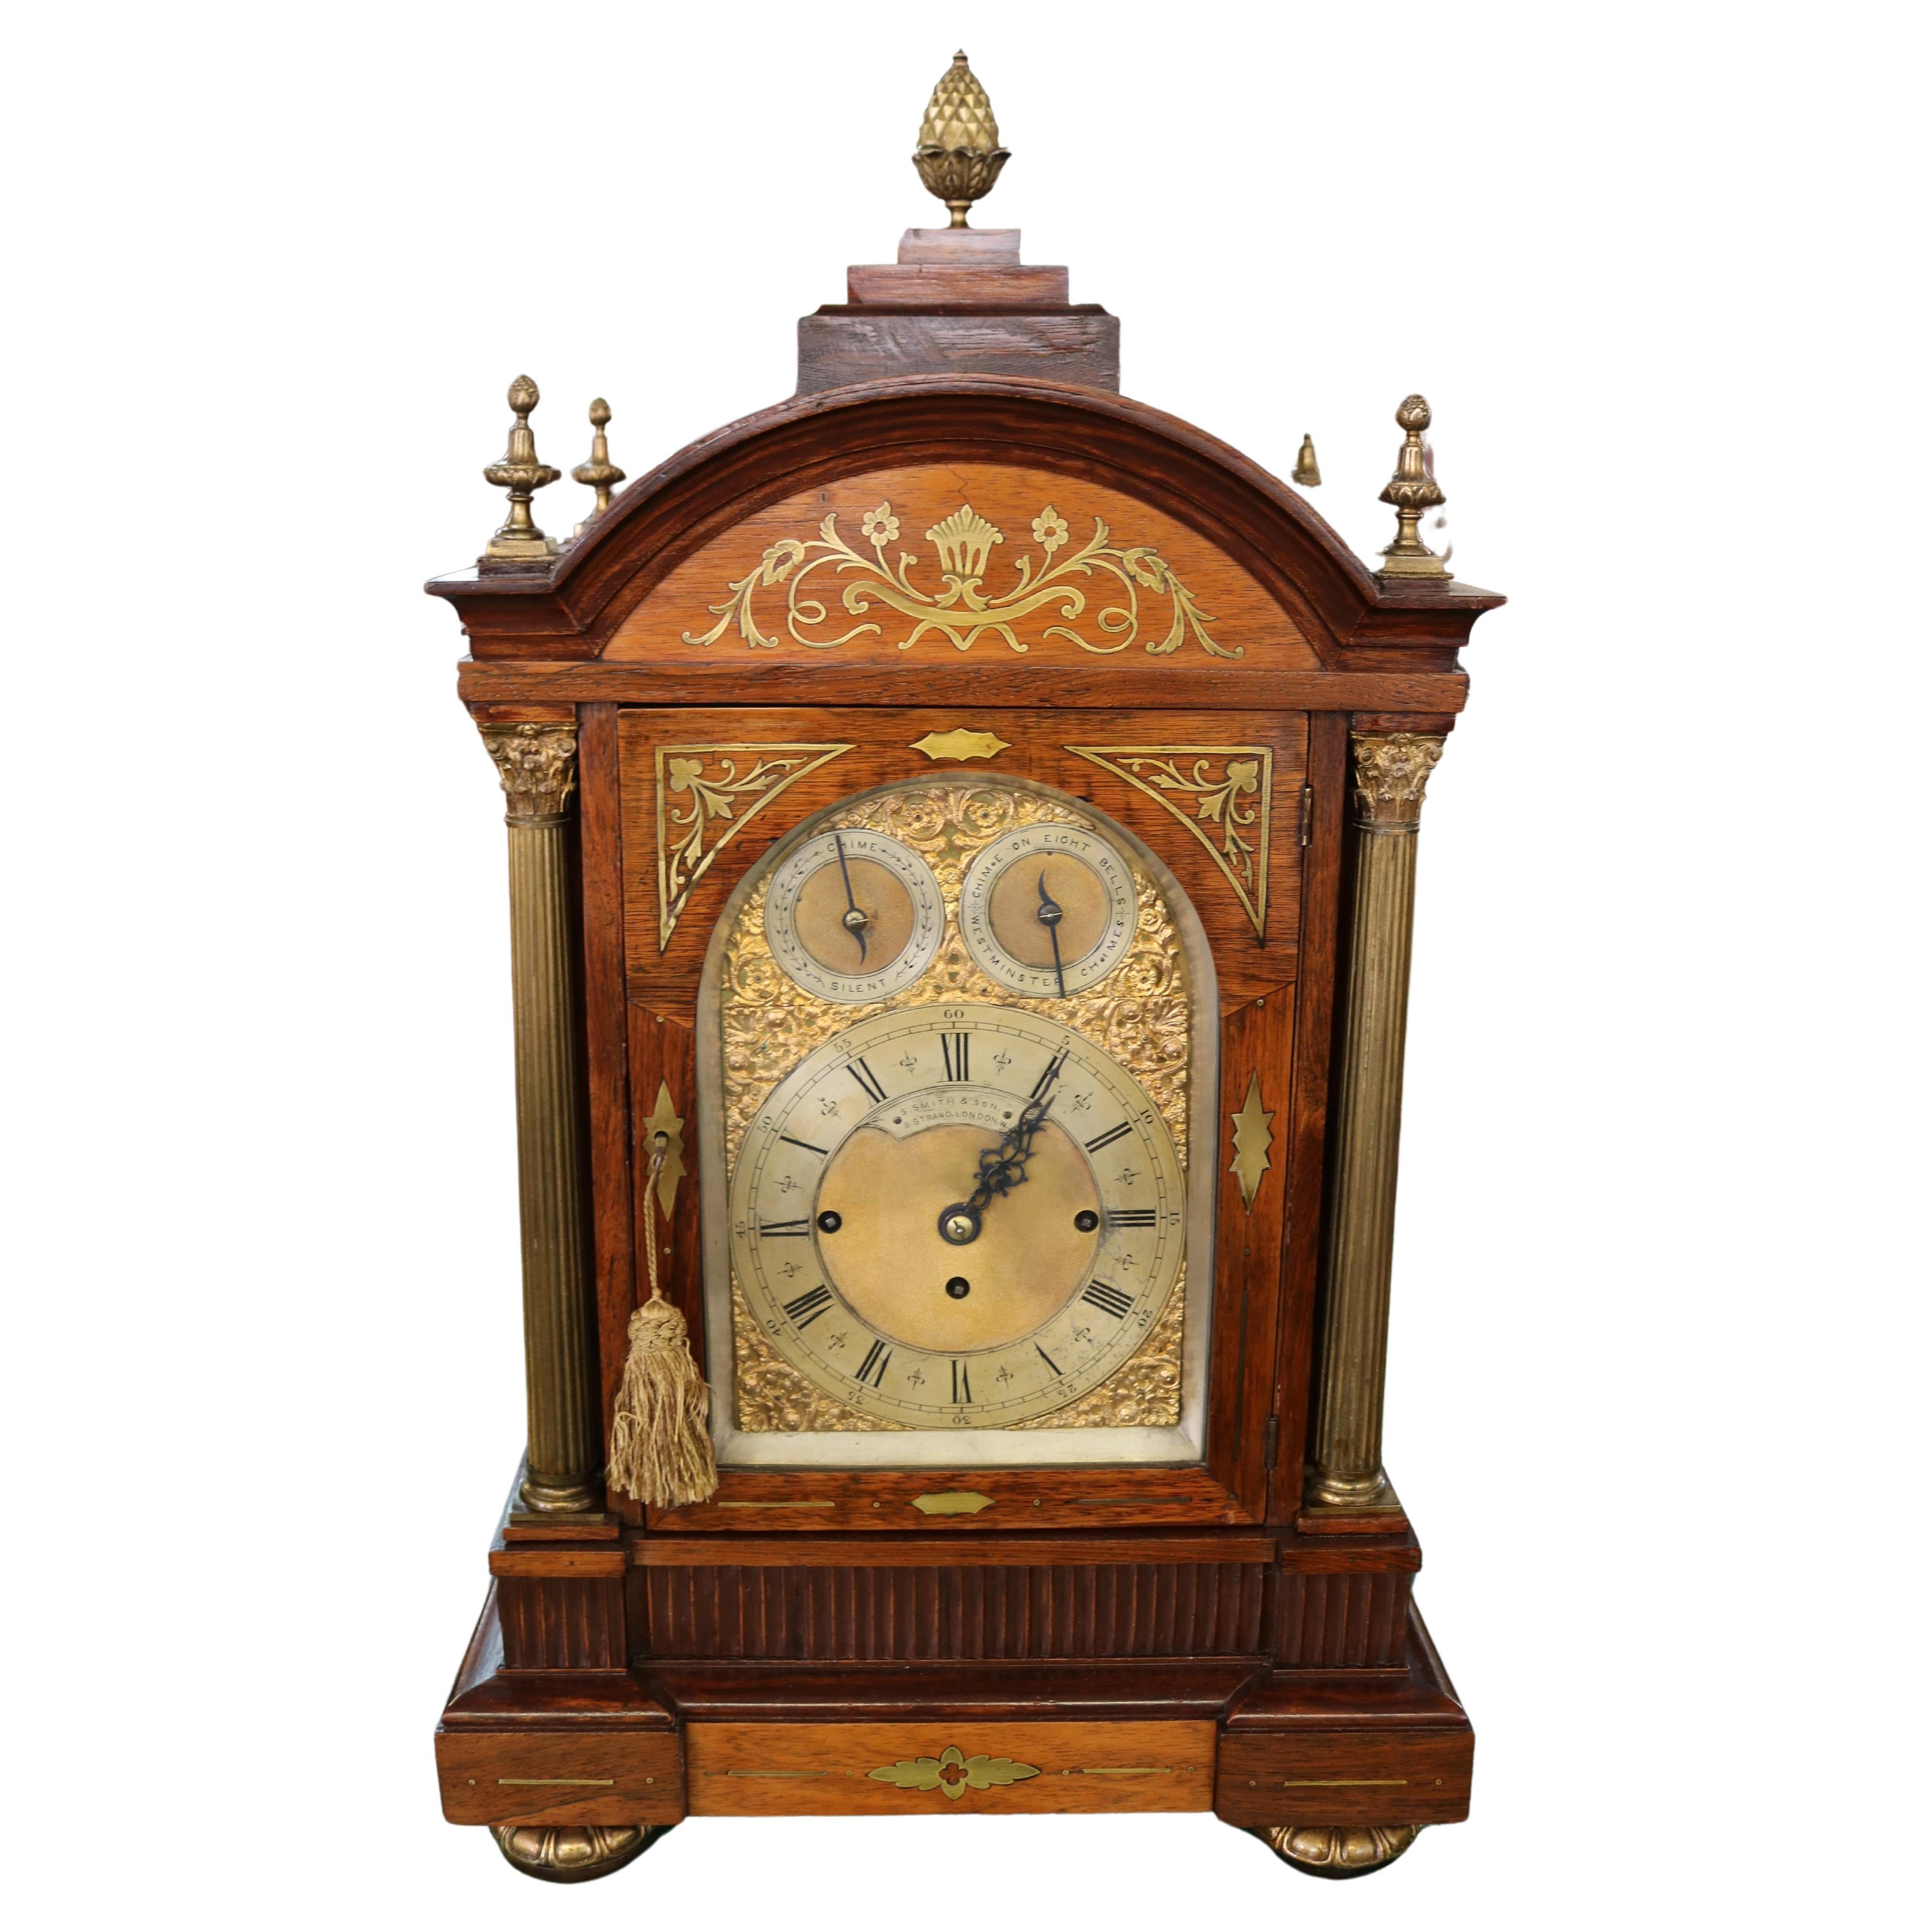 19th Century Rosewood Musical Mantel Bracket Clock by S. Smith & Sons London